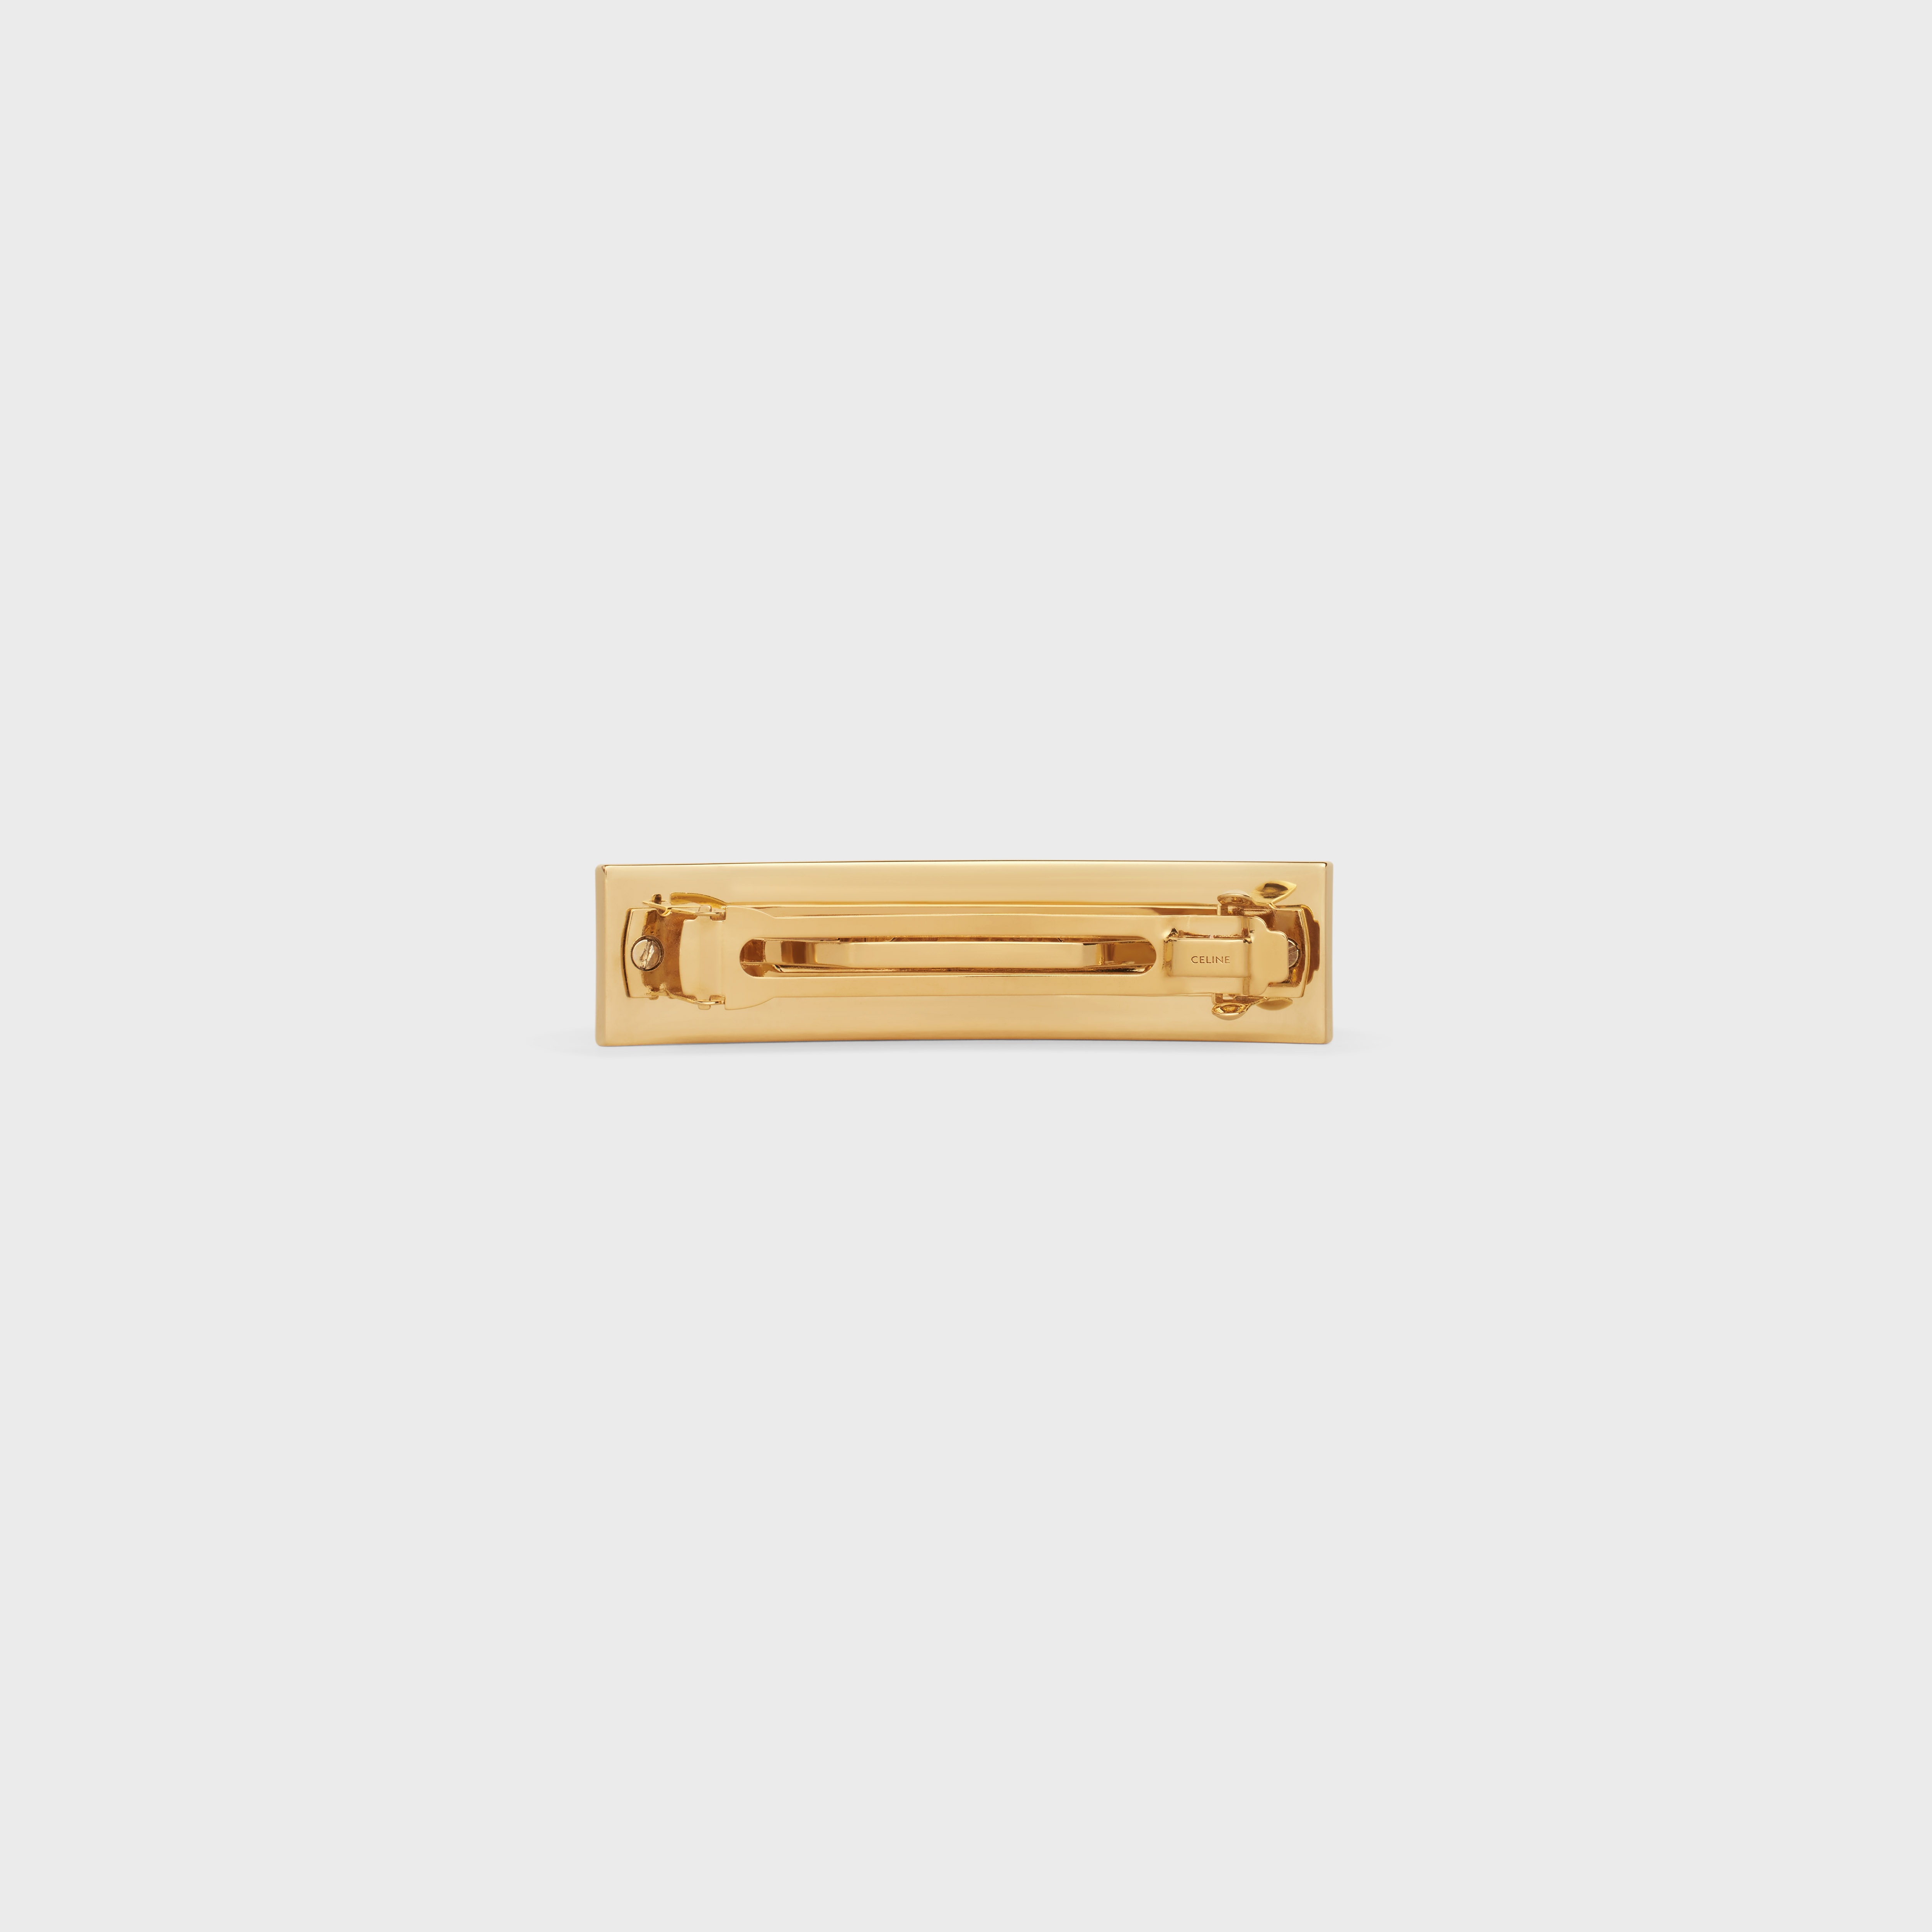 Celine Hair Clip in Brass and Steel with Gold Finish - 3